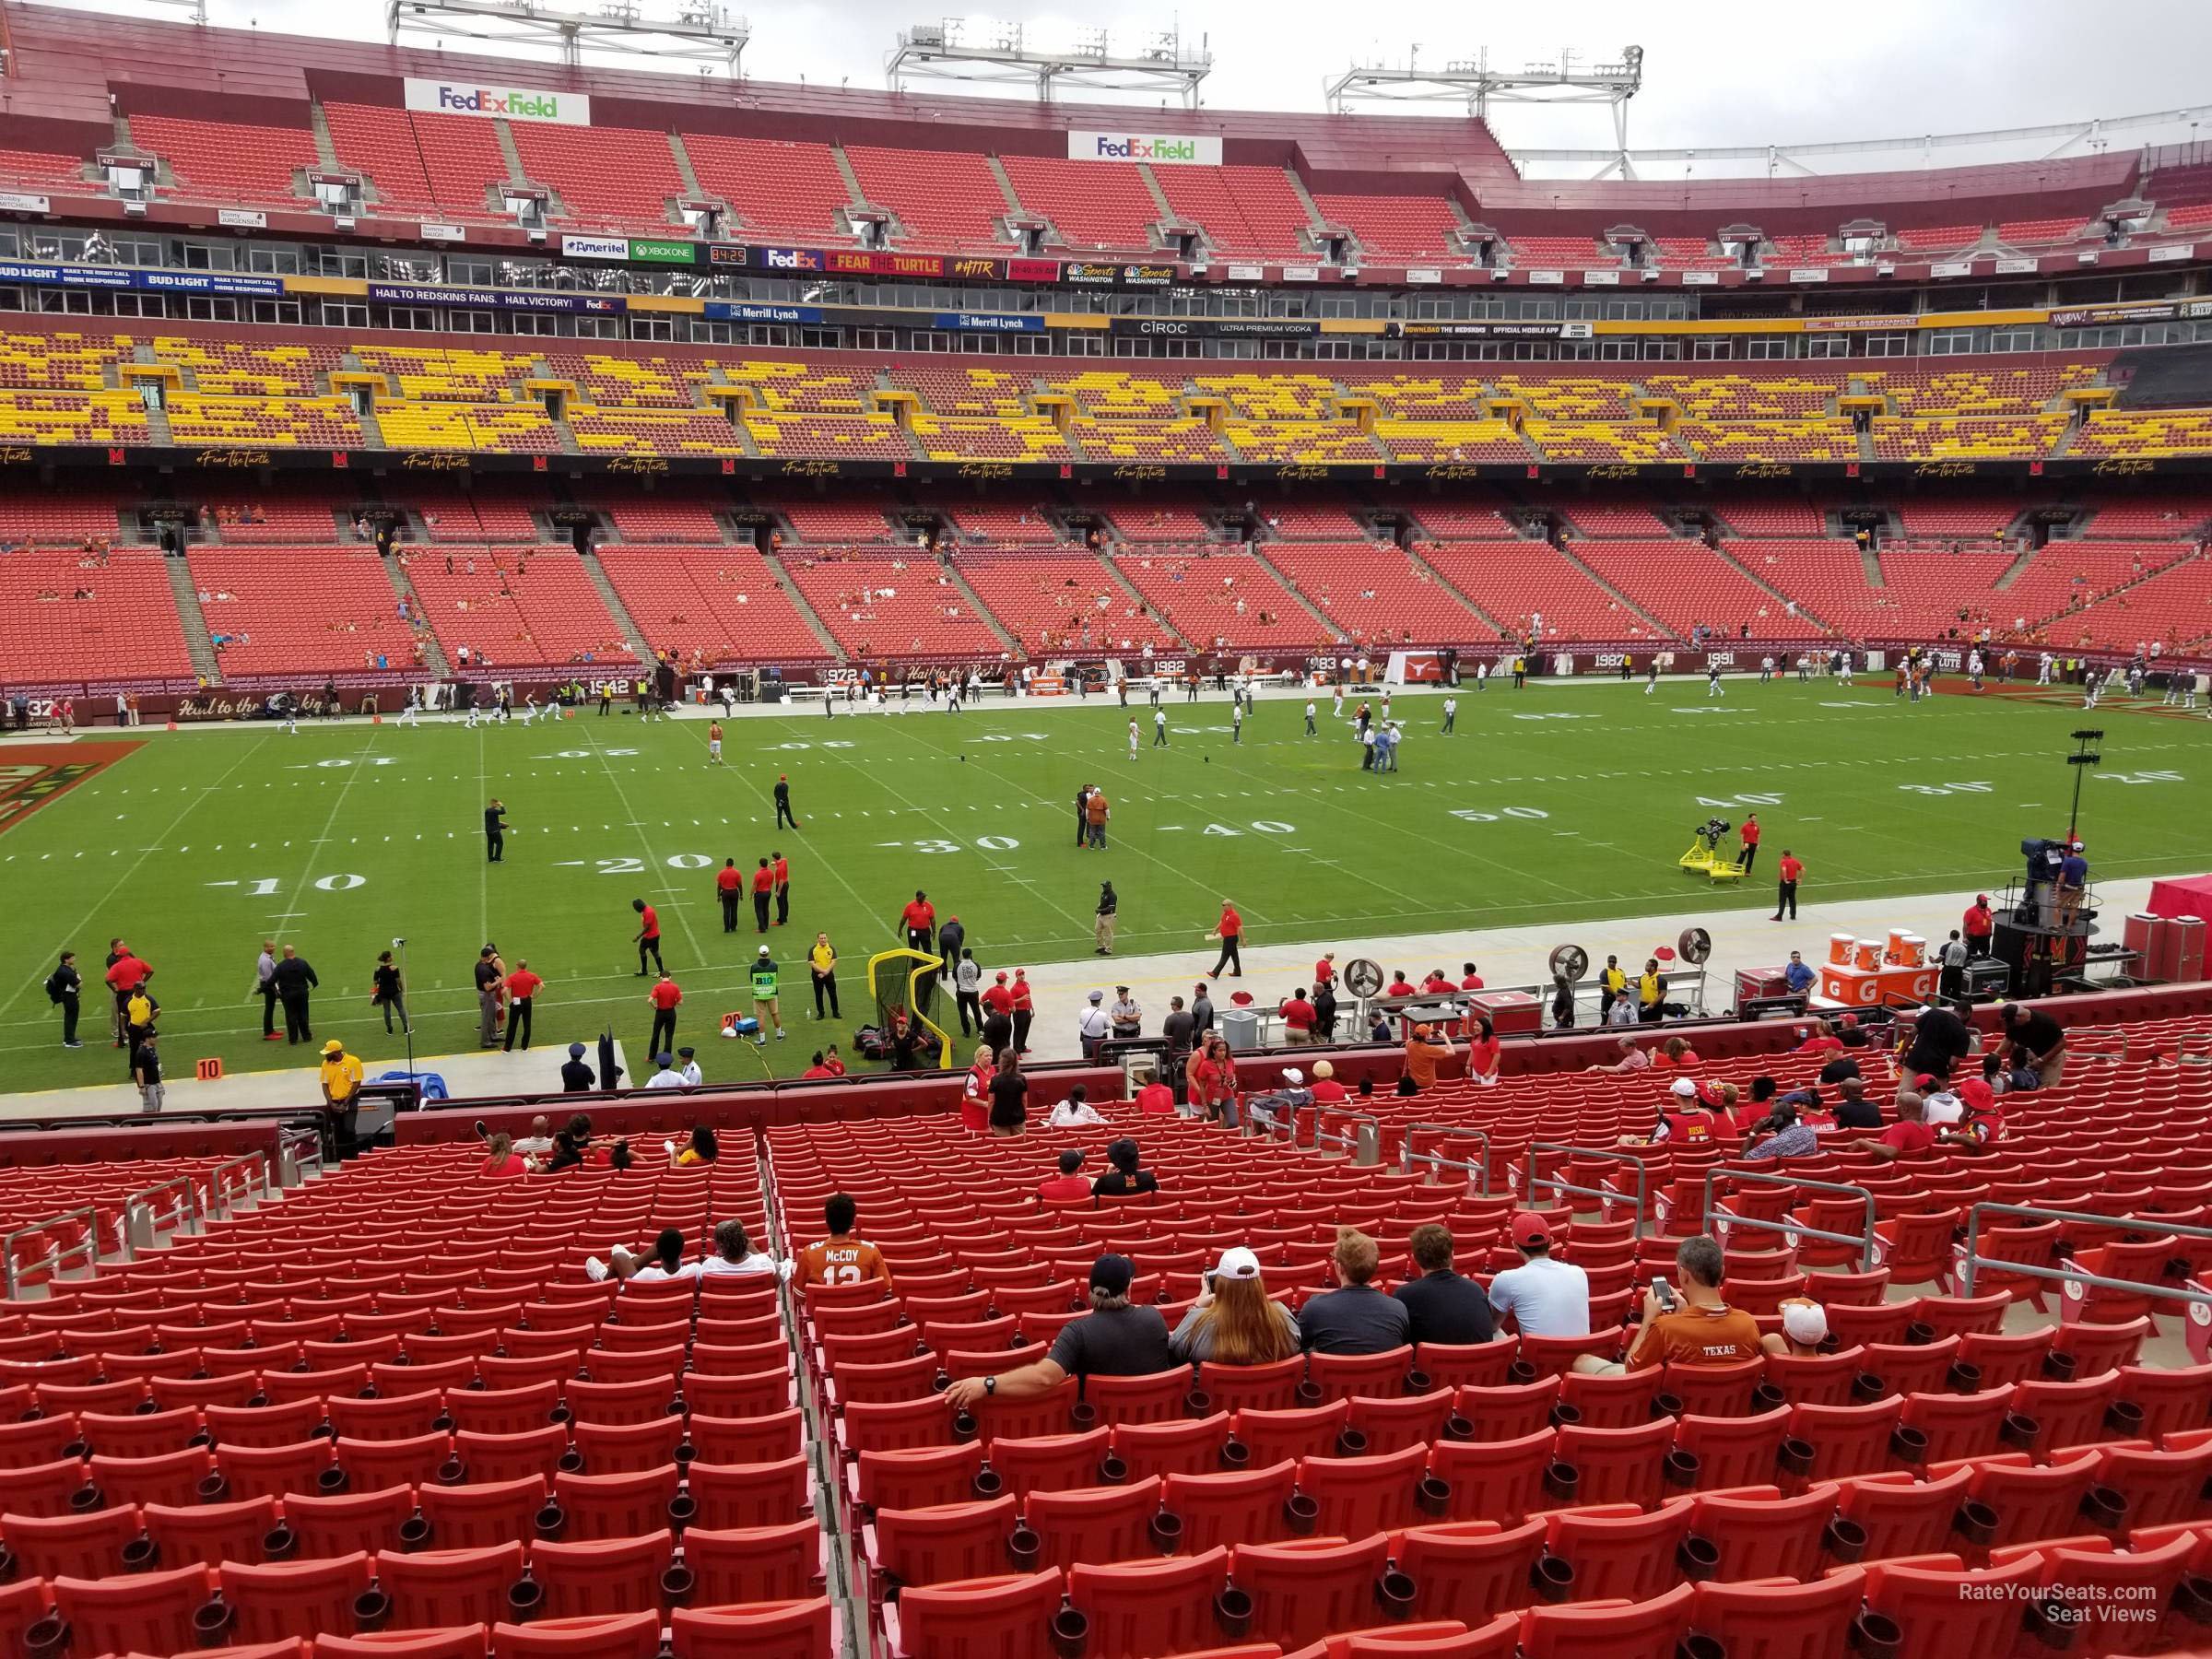 section 204, row 1 seat view  - fedexfield